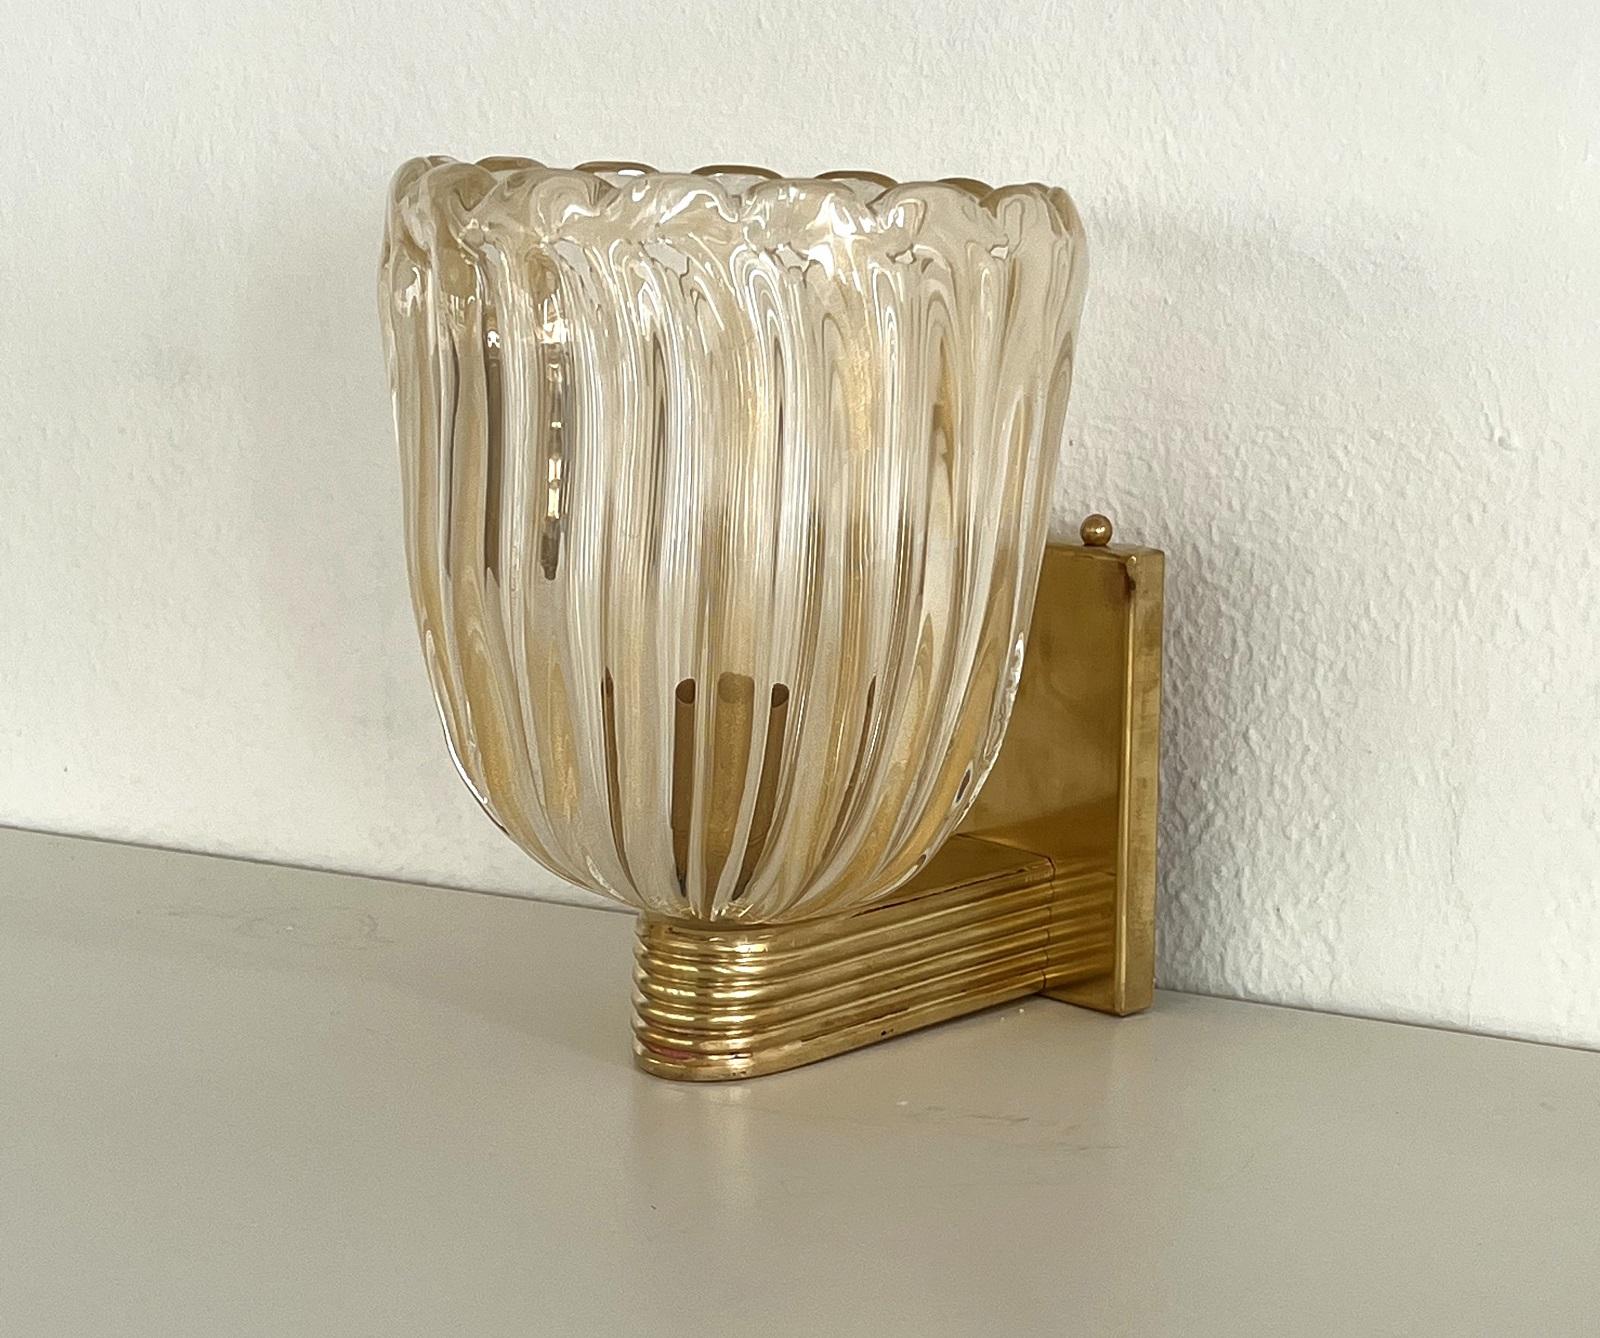 Italian Brass and Murano Glass Wall Lights or Sconces in Art Deco Style, 1990s For Sale 6